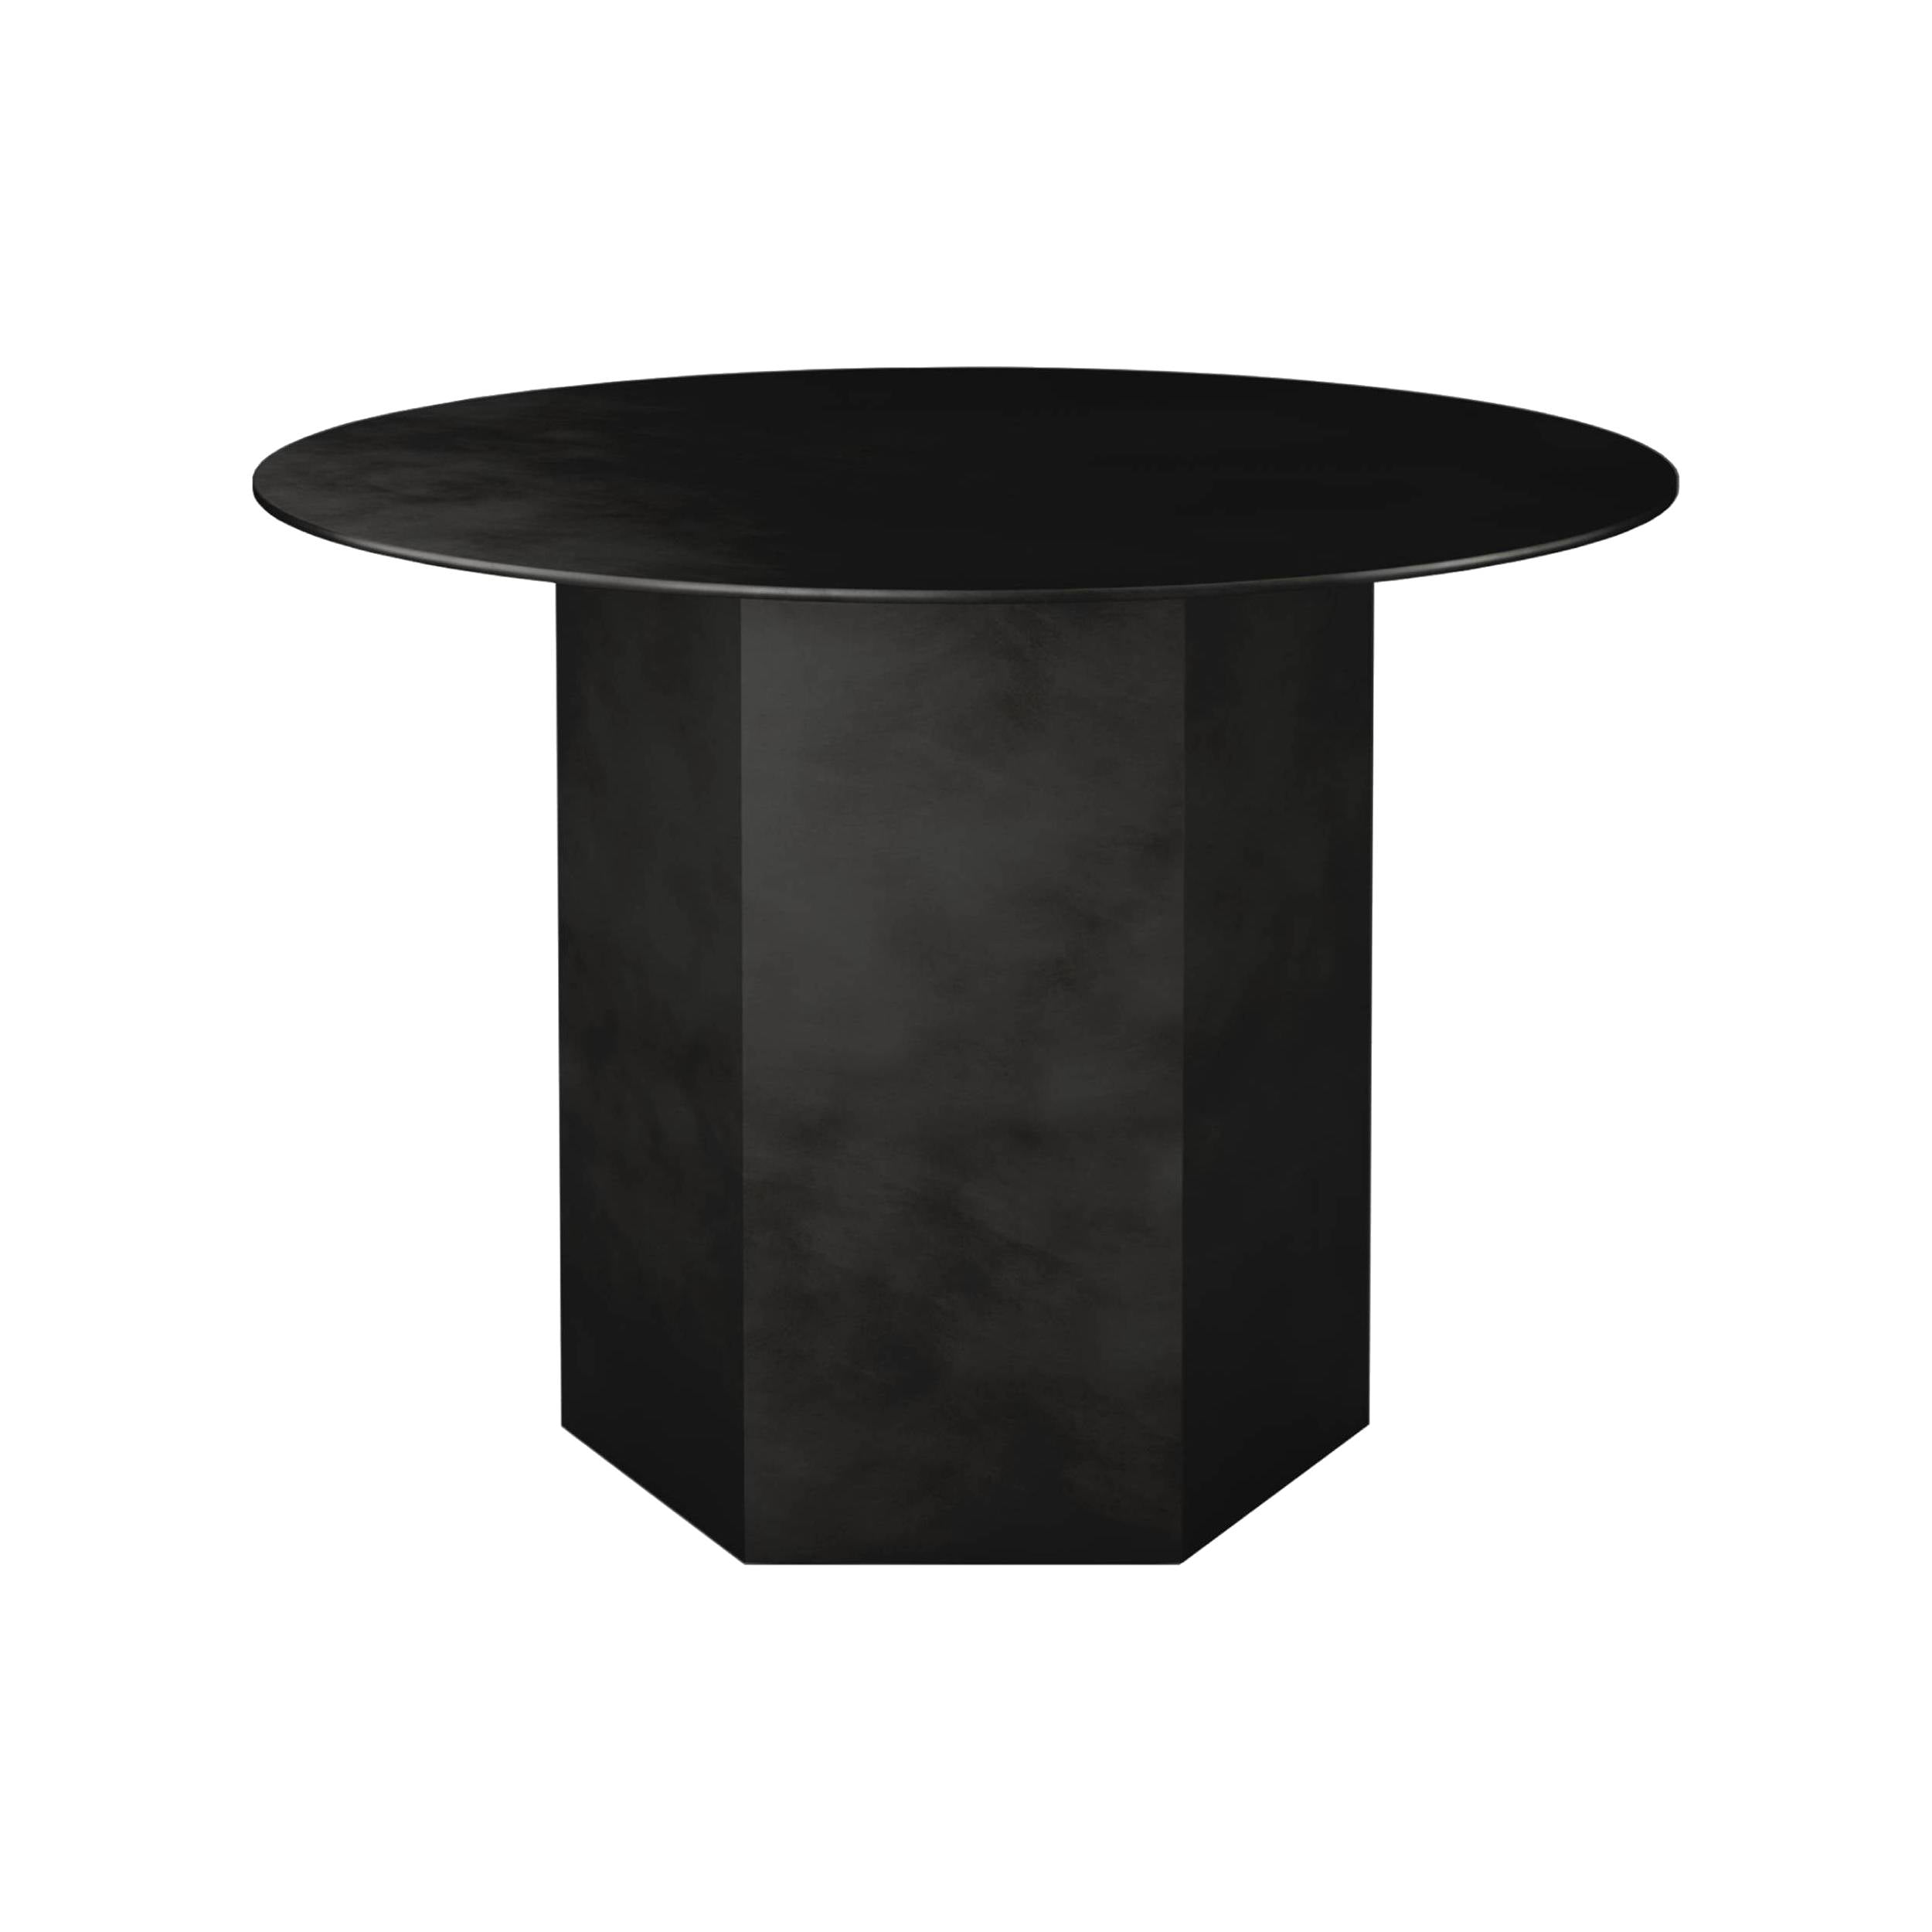 Epic Round Coffee Table: Steel + Small - 23.6